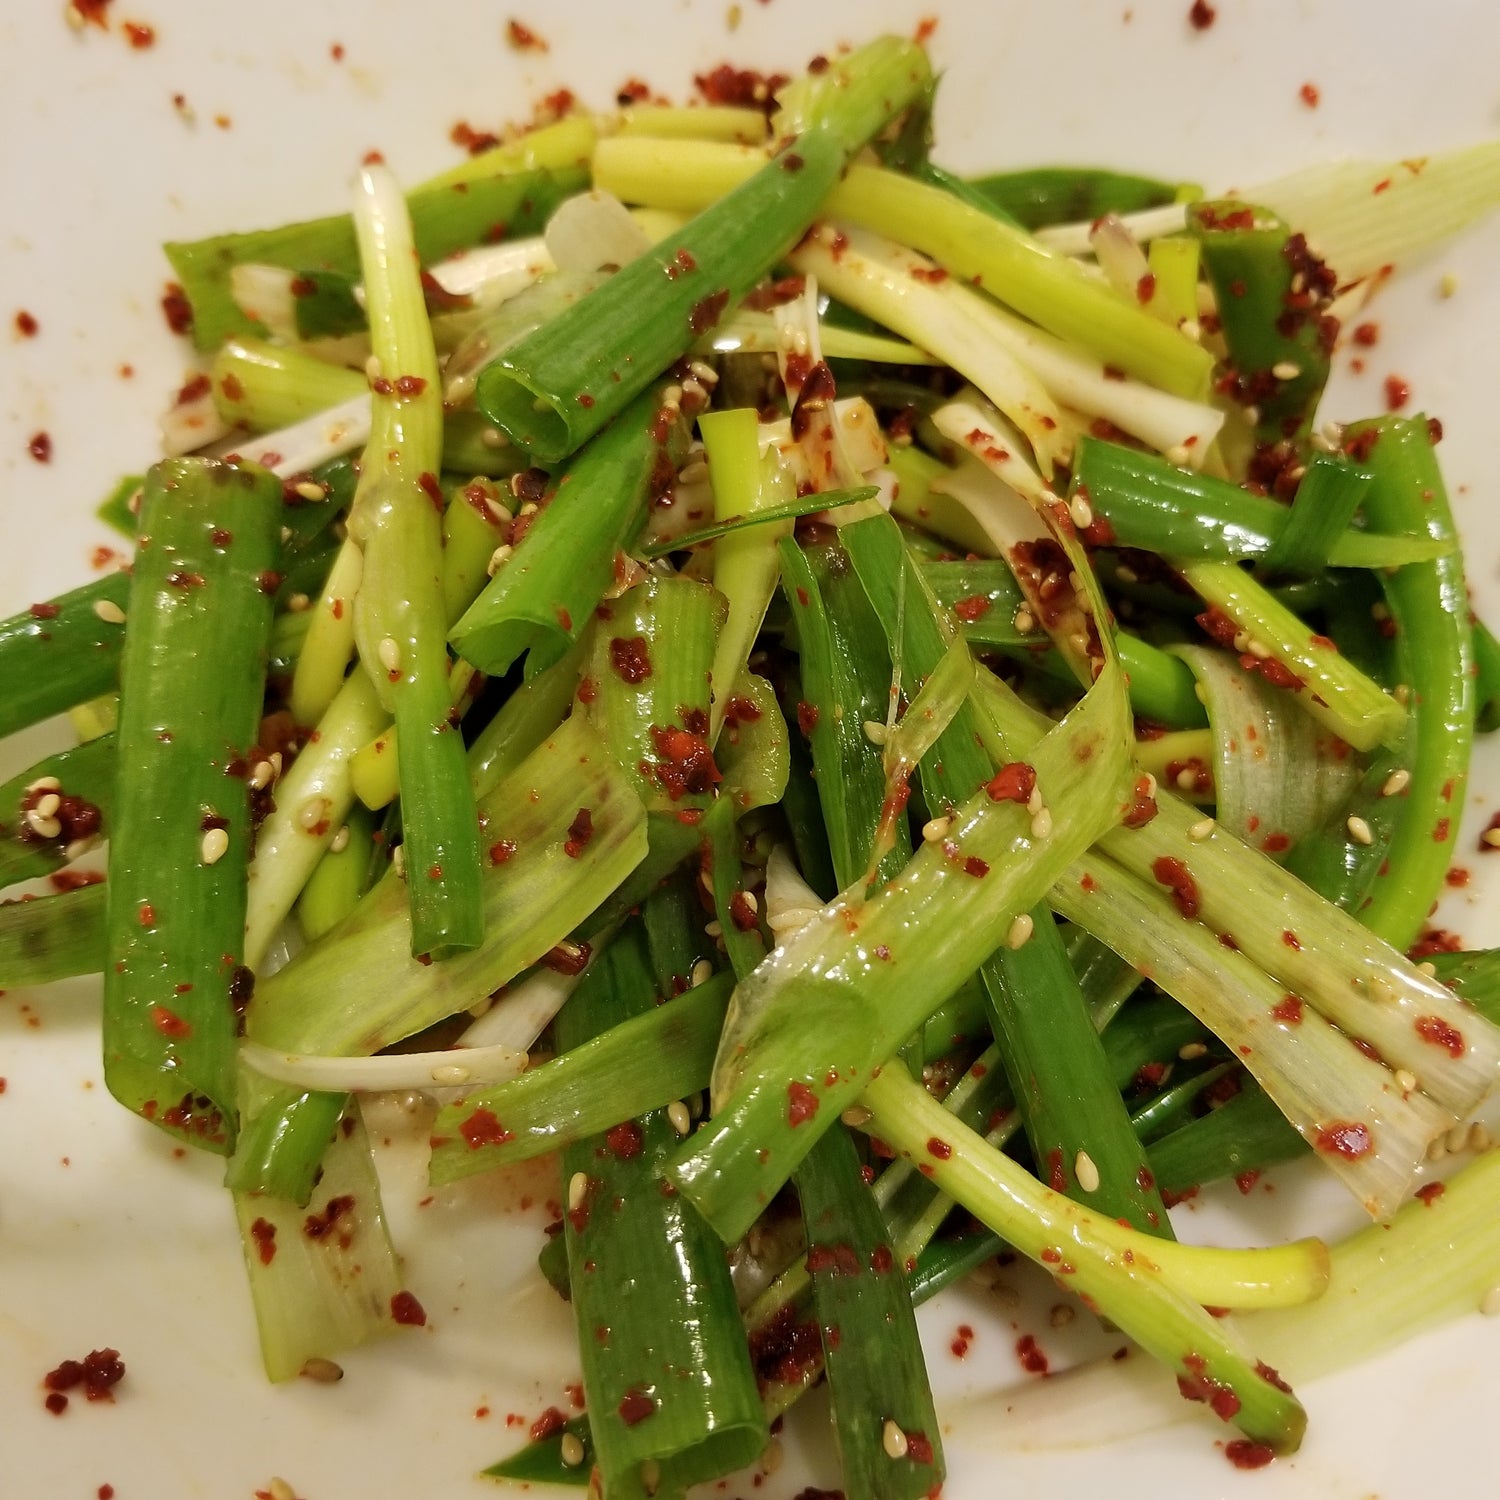 Spicy Leak Salad - Instructional image for cutting green leeks in Korean cooking style.